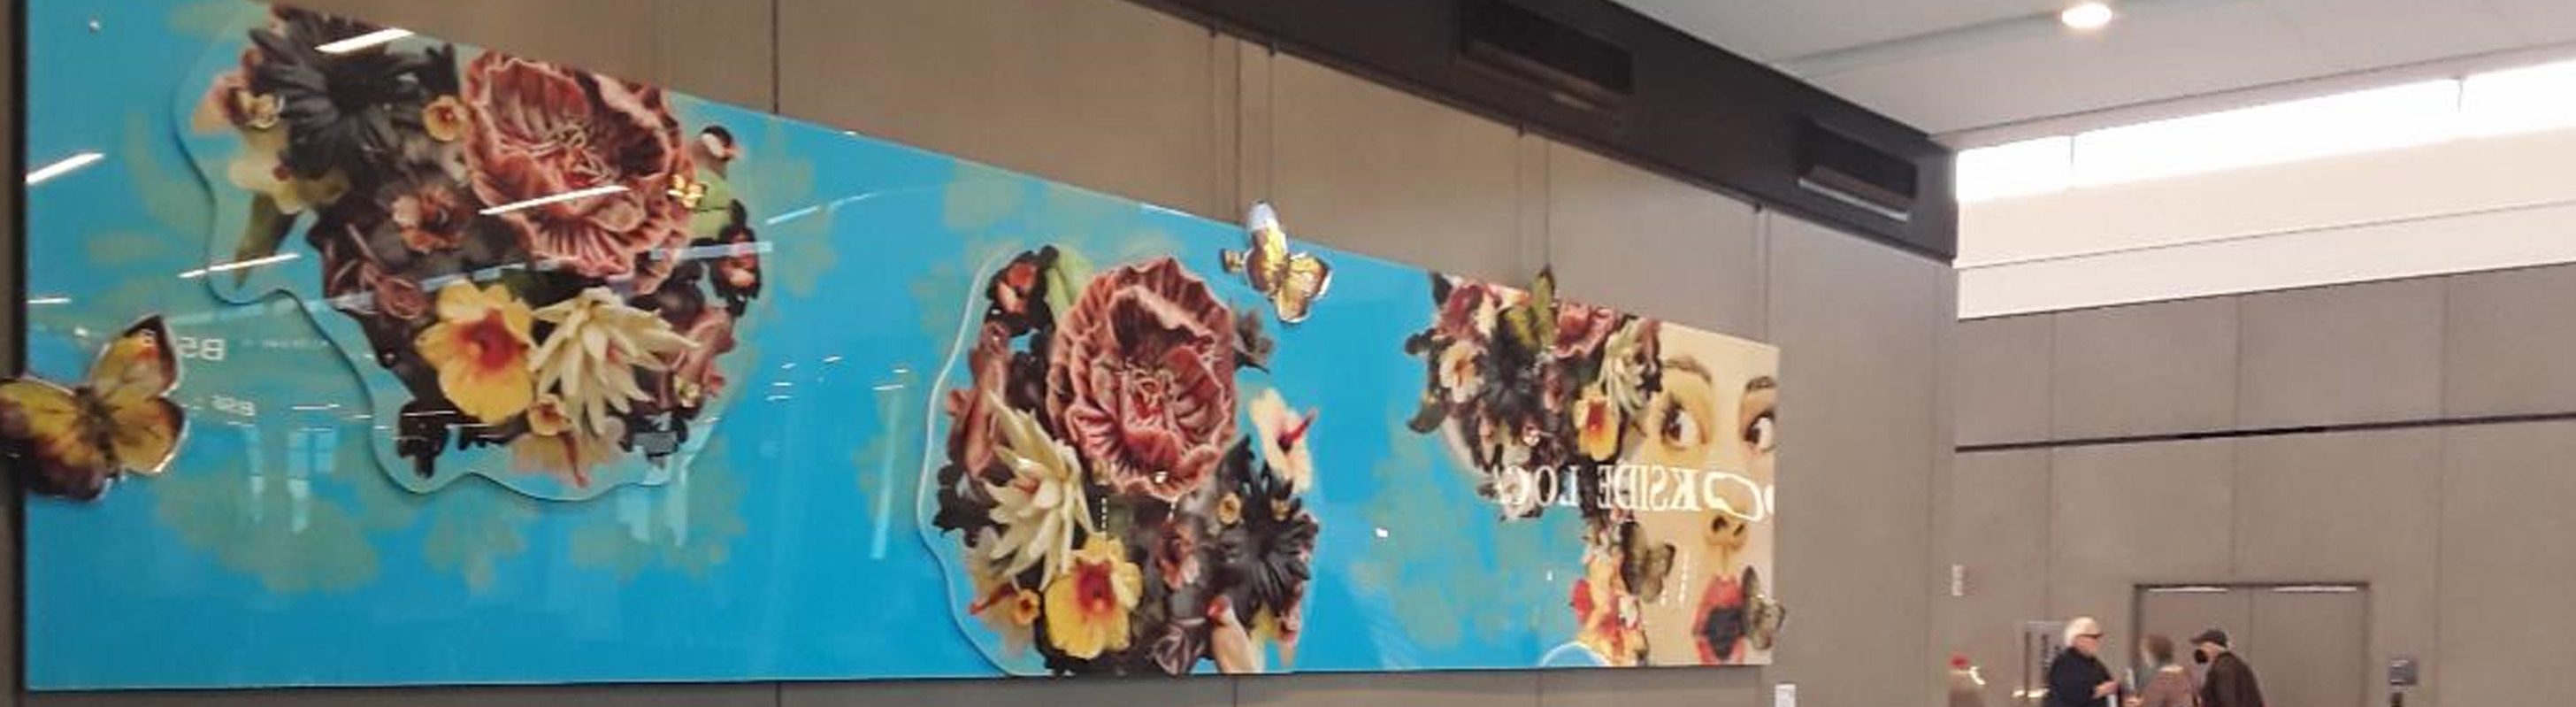 Artwork by Bernadette Torres at the new KCI airport